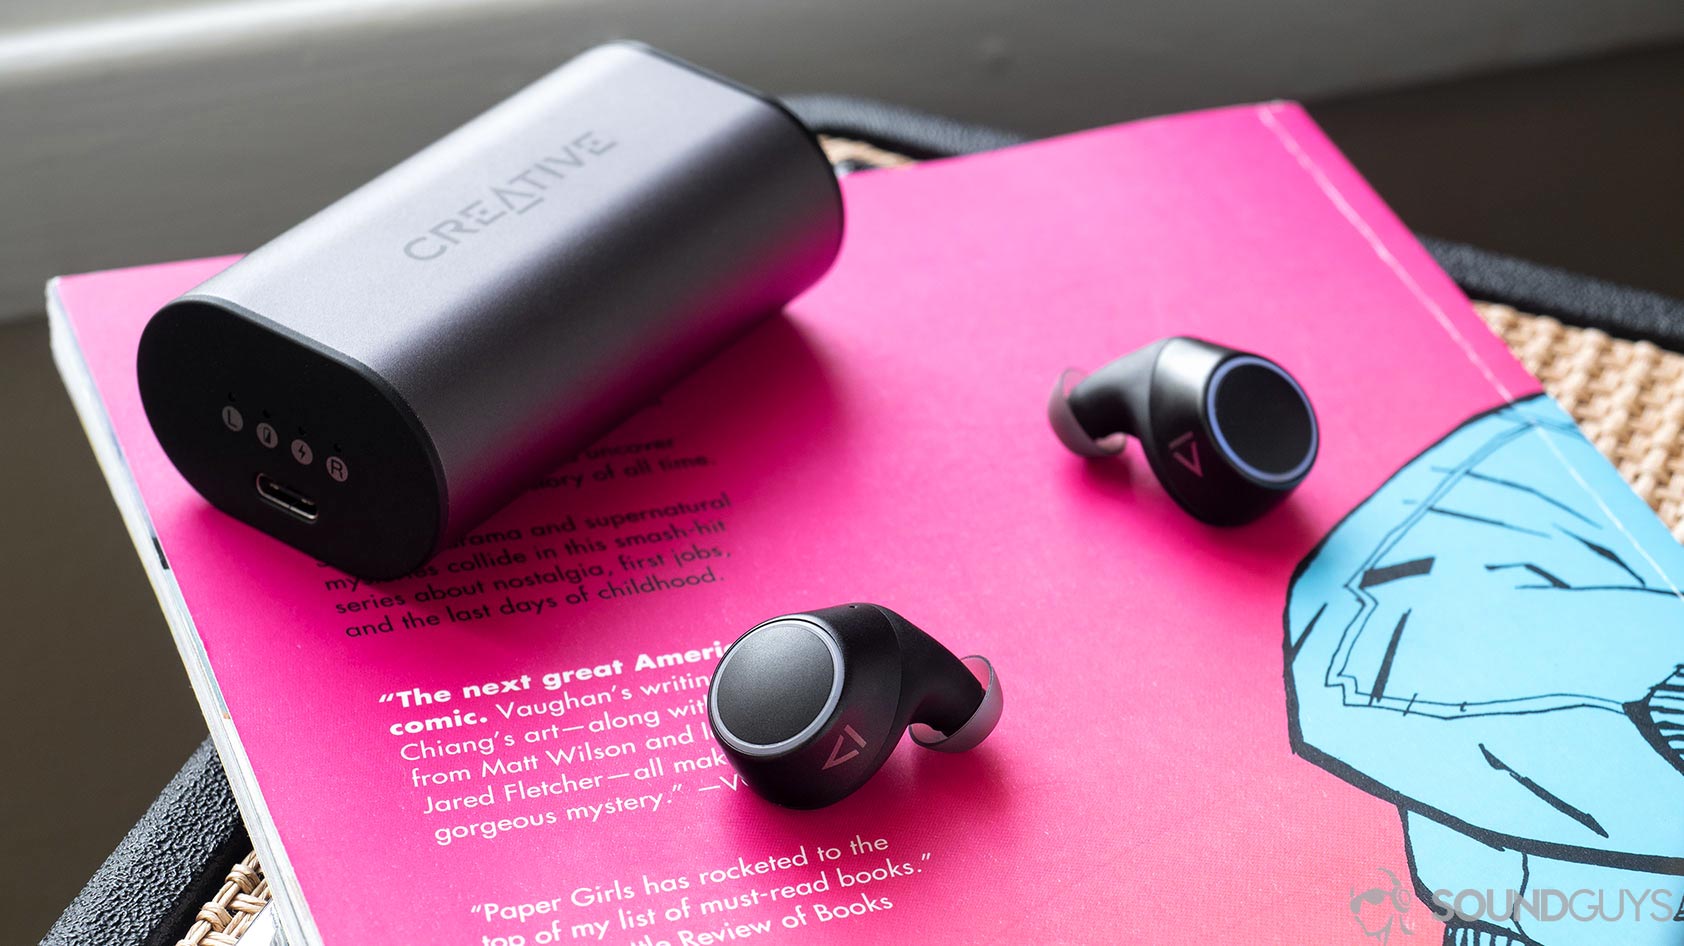 The Creative Outlier Air earbuds on a pink comic book with the charging case in the background.